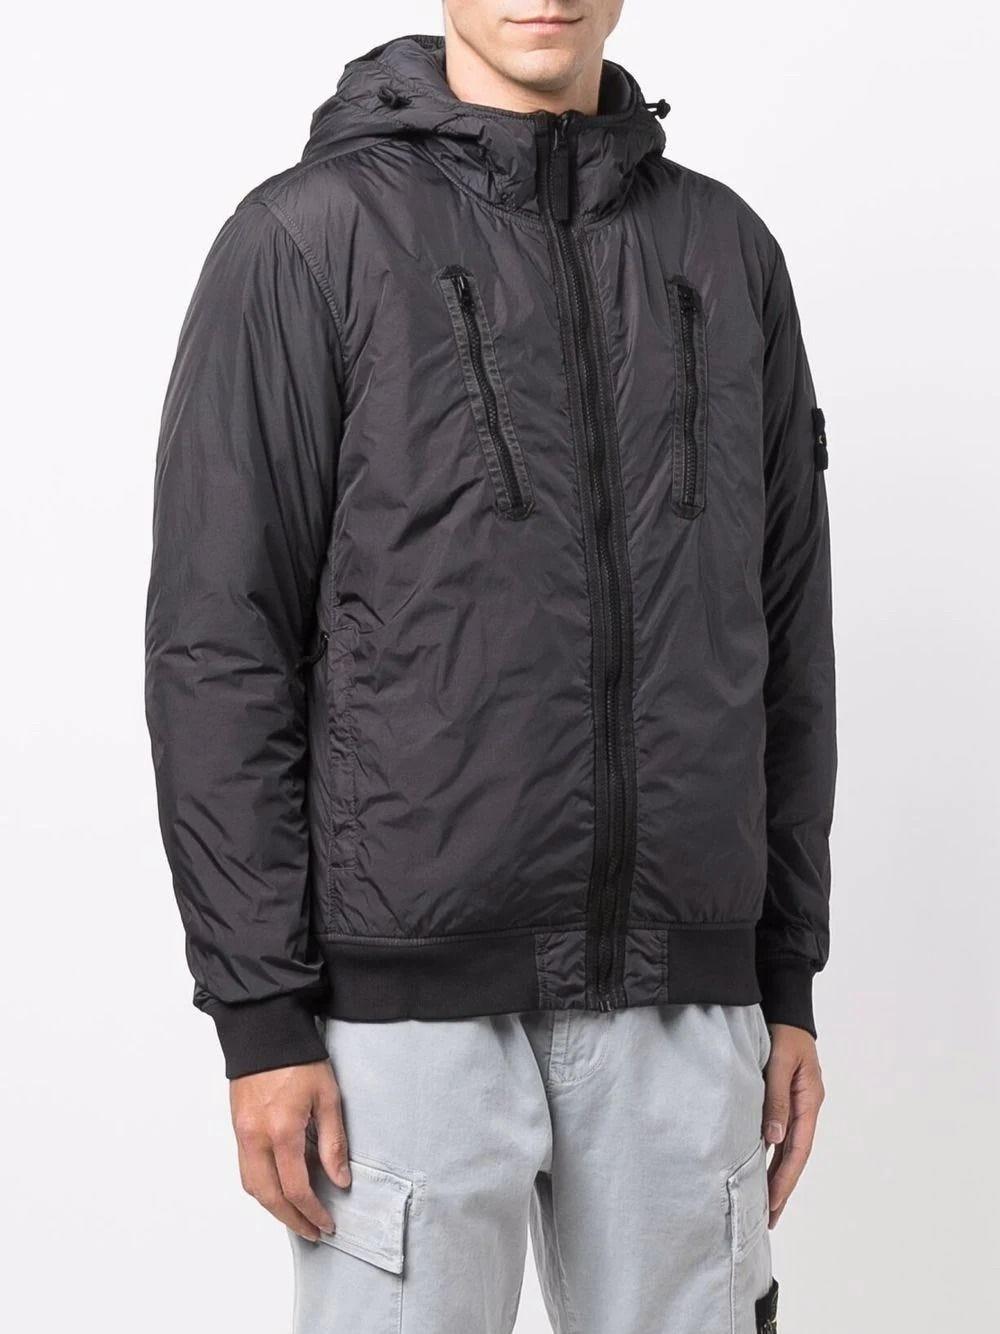 Stone Island Zip-up Hooded Bomber Jacket in Grey (Gray) for Men | Lyst